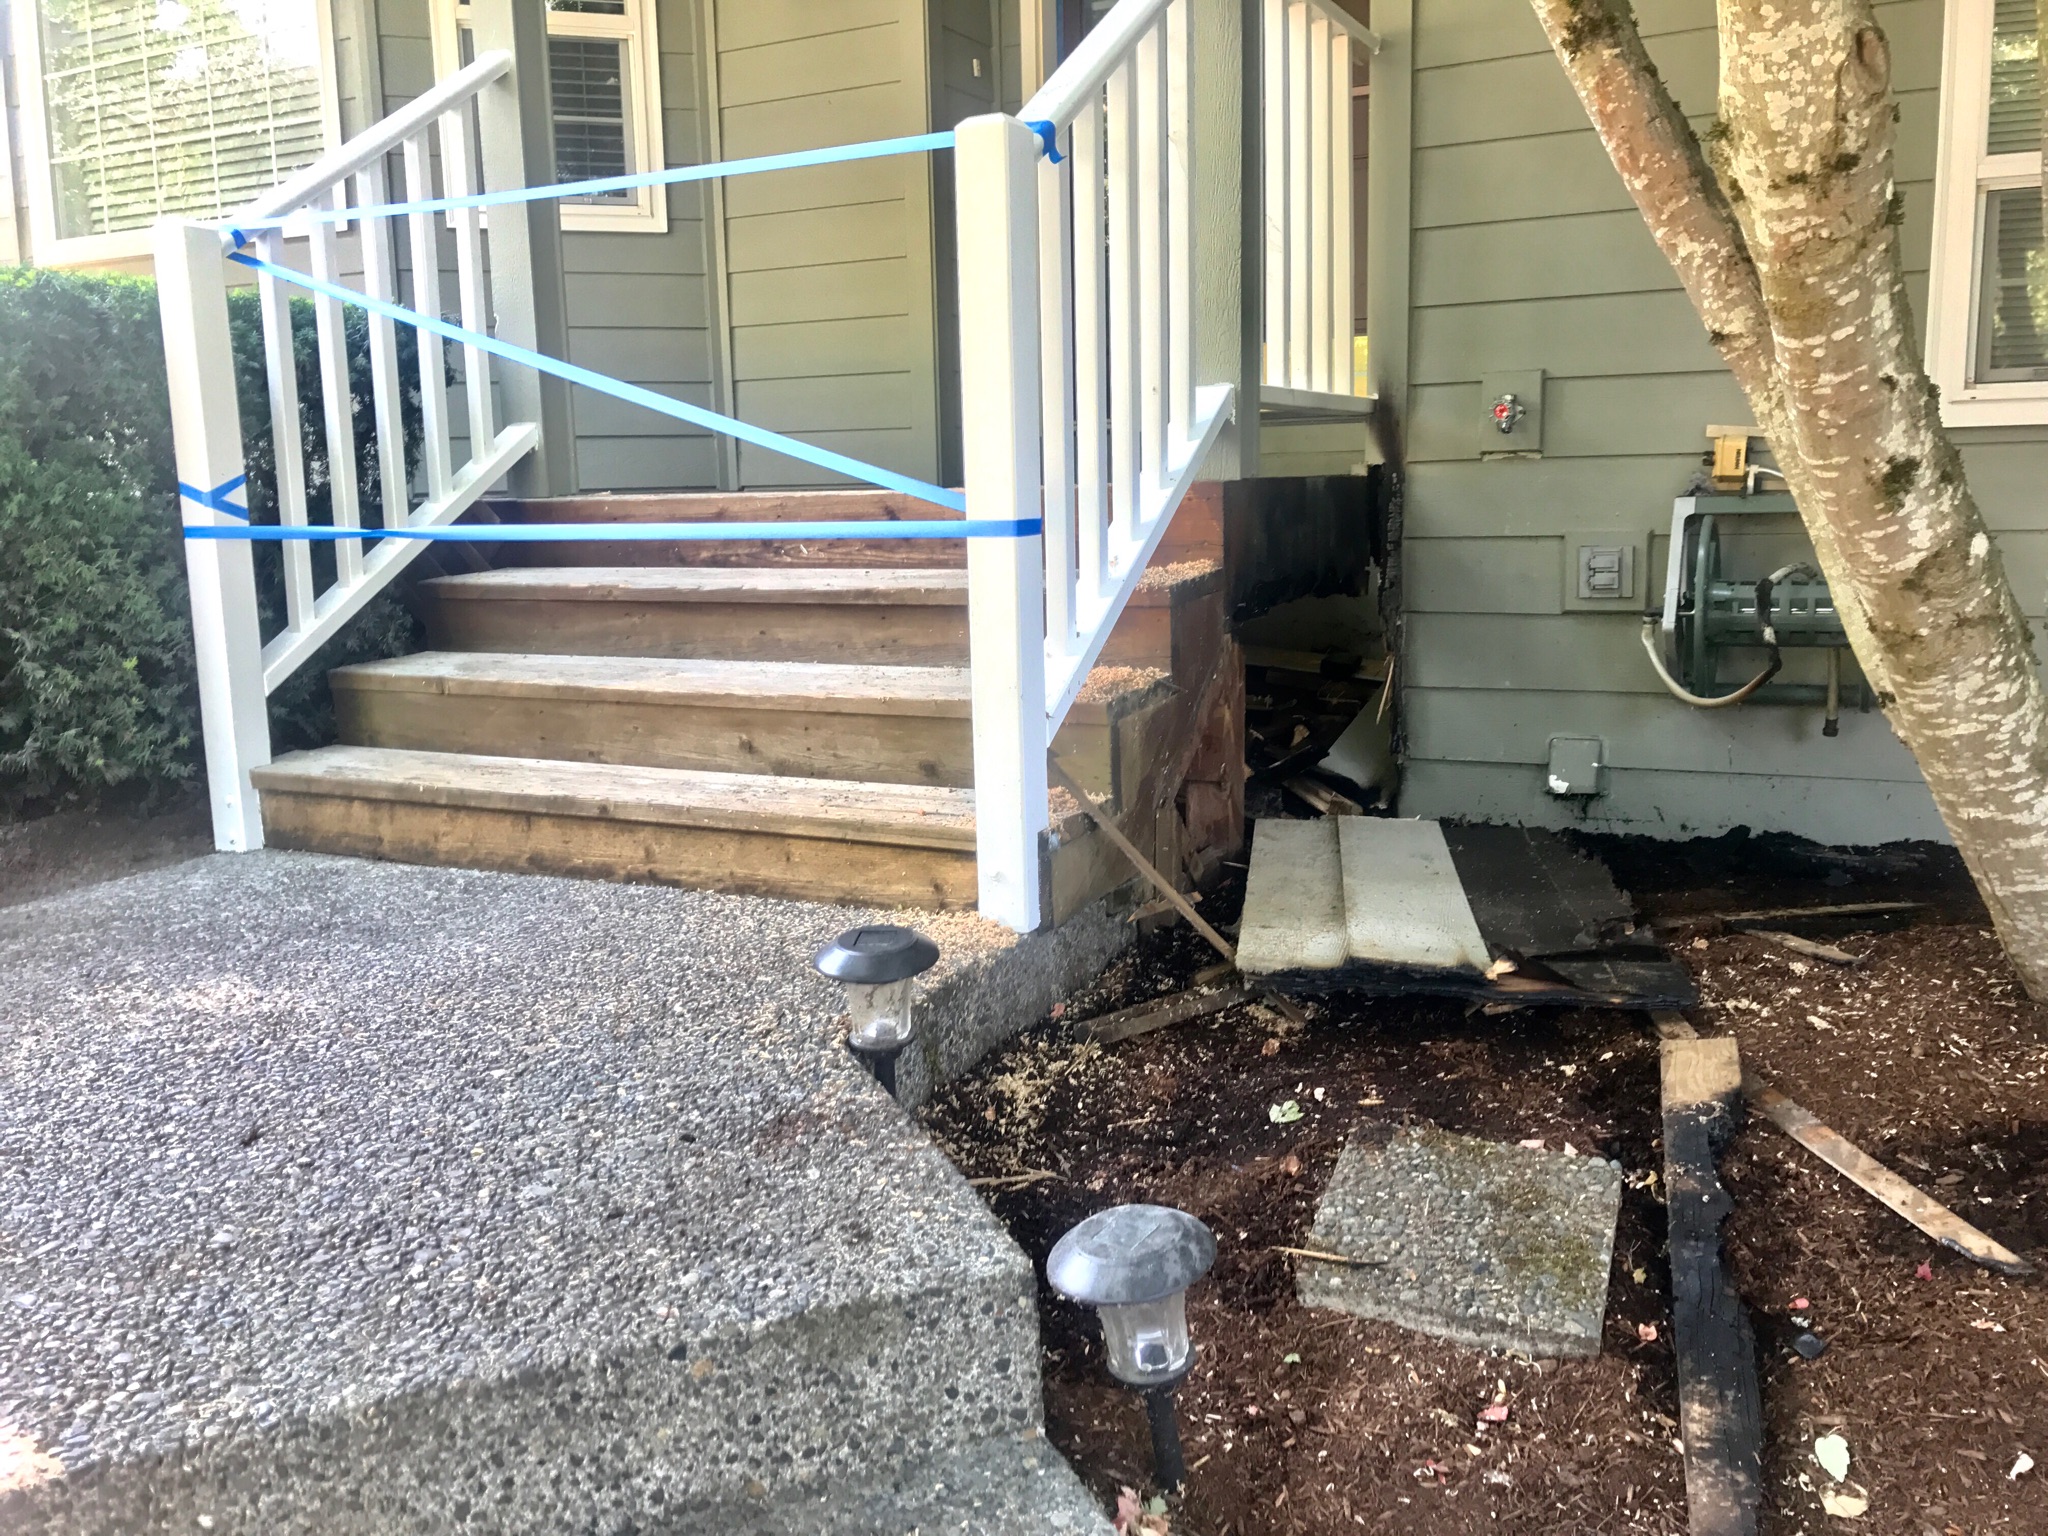 The quick response of a newspaper carrier and Fire District 6 helped contain a fire early Monday morning that began under the front porch of a home at 12212 N.E. 44th Ave. in Vancouver.